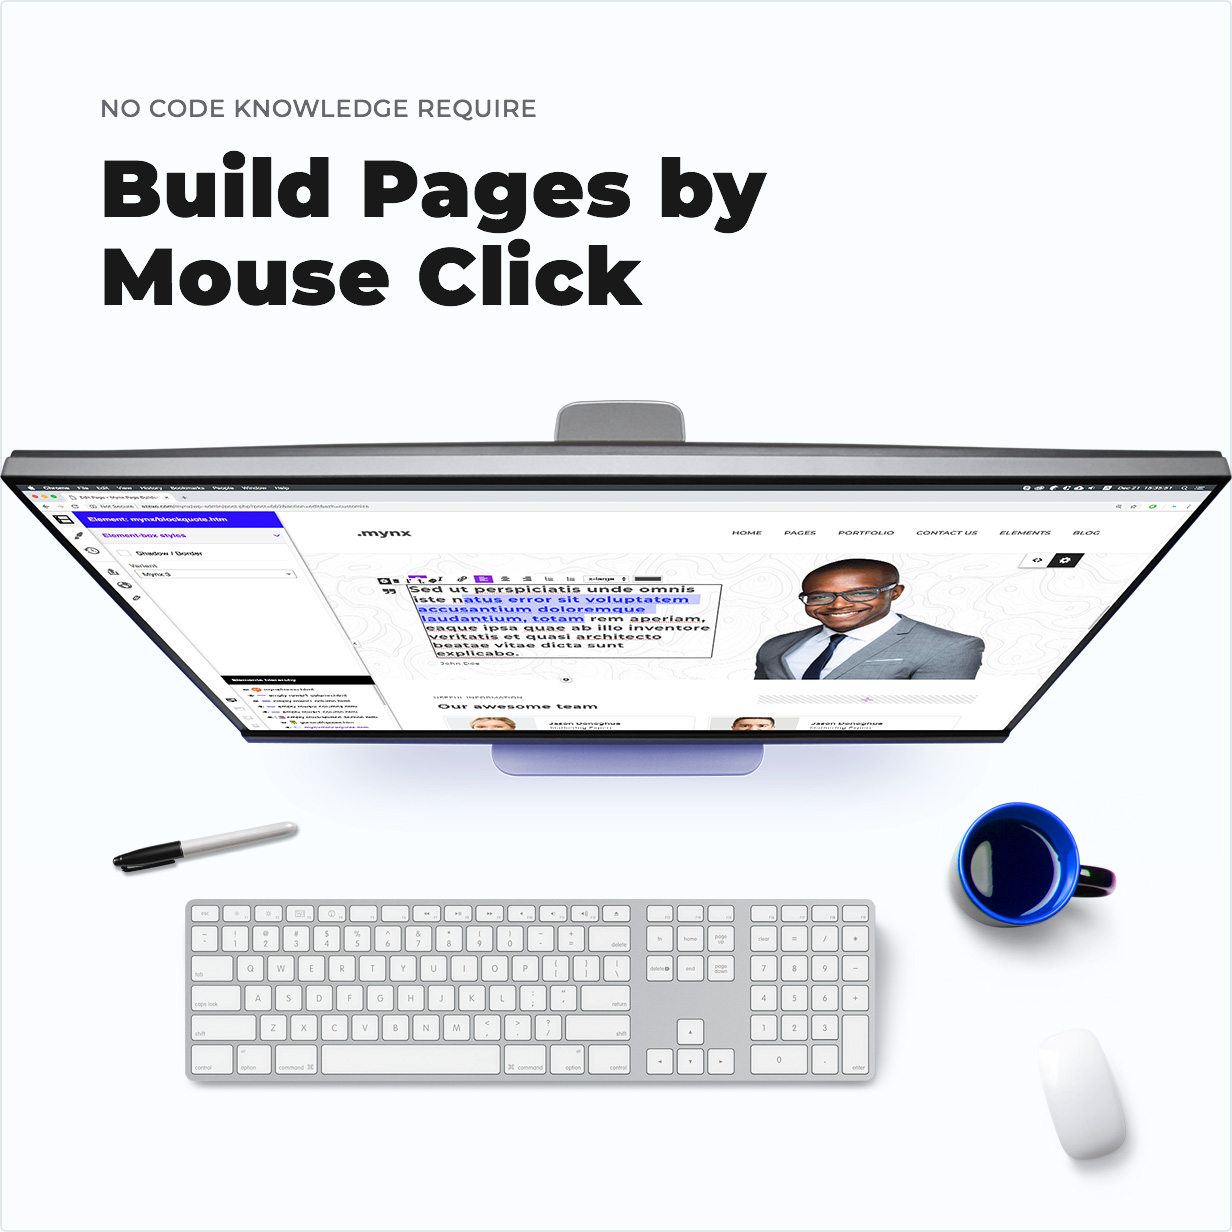 No Code Knowledge Require – Build Pages by Mouse Click